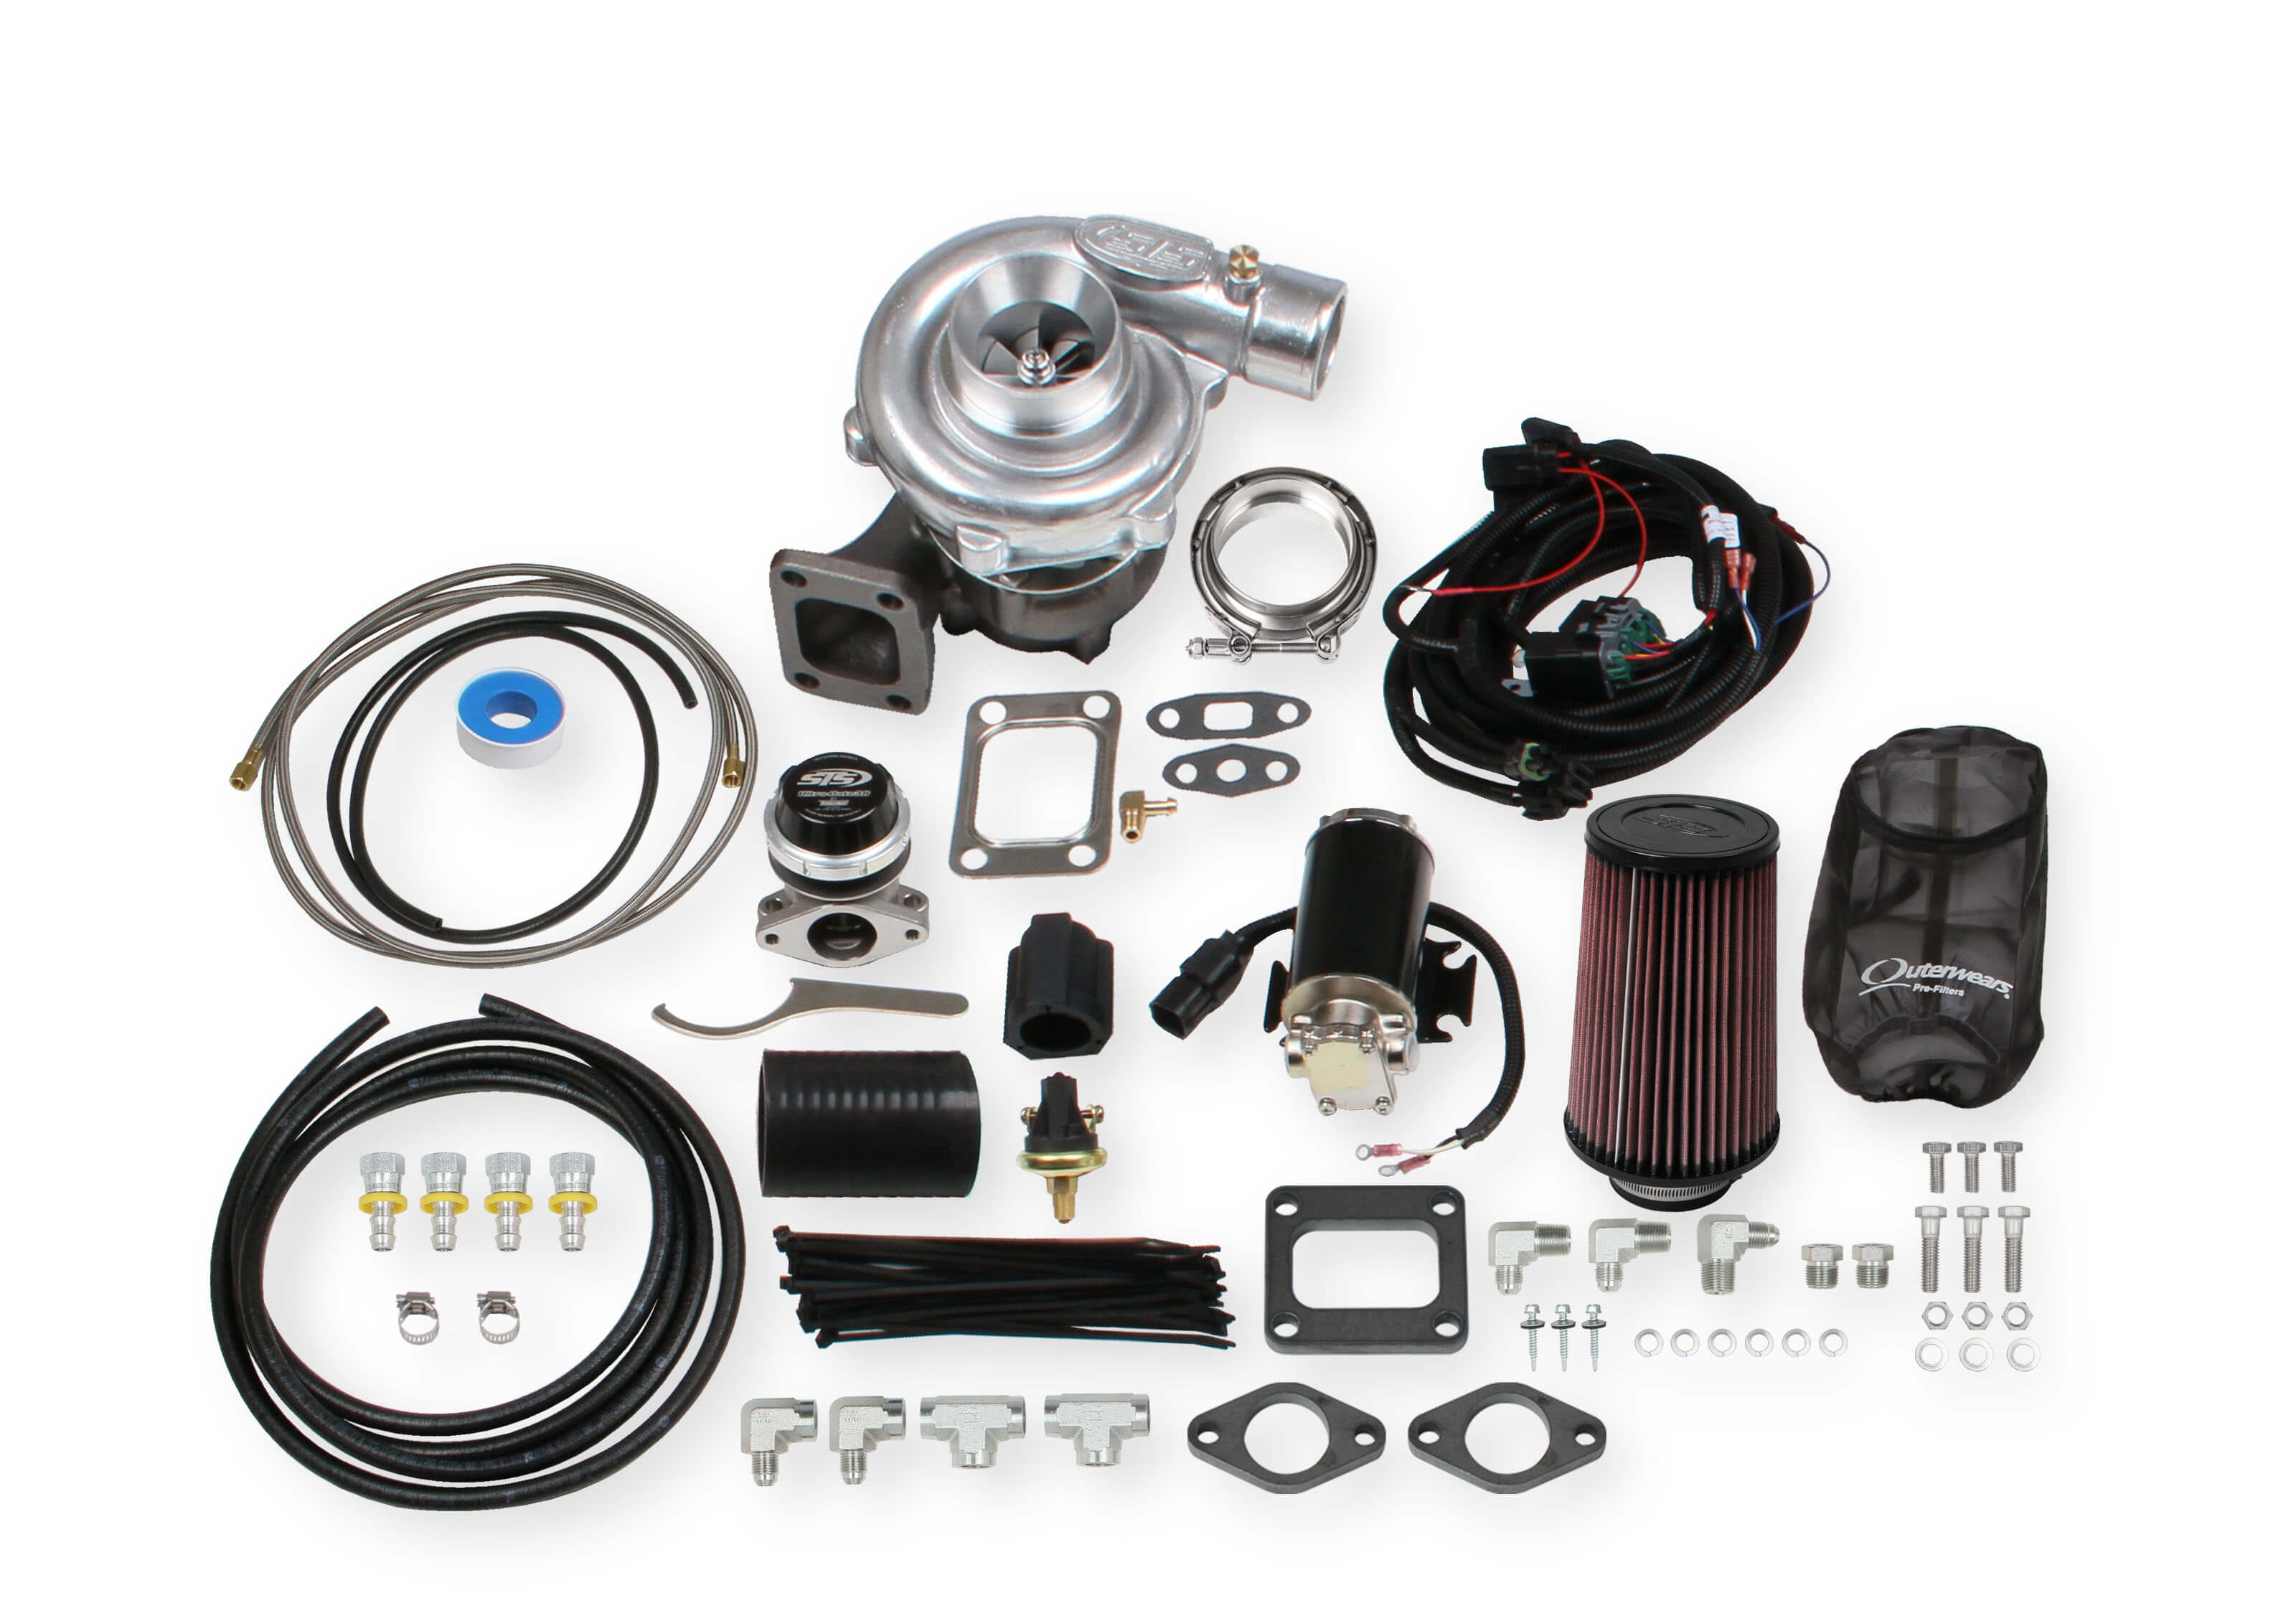 STS Turbo Remote Mounted Single Turbo Kit for 4.0-5.0 liter engines